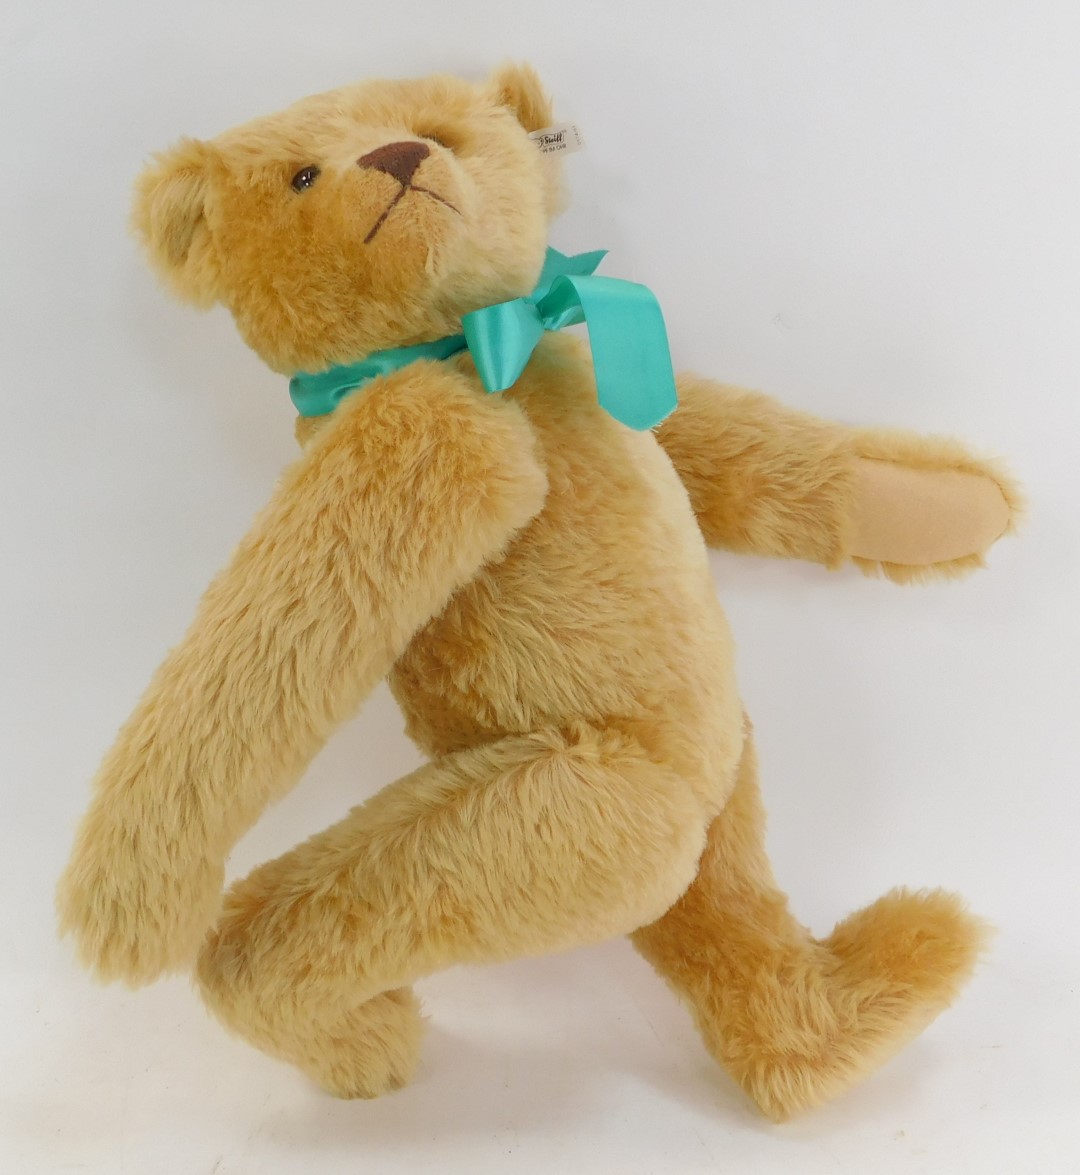 A Steiff British Collectors 1907 replica Teddy bear, limited edition number 1055/2000, 55cm high, - Image 2 of 3